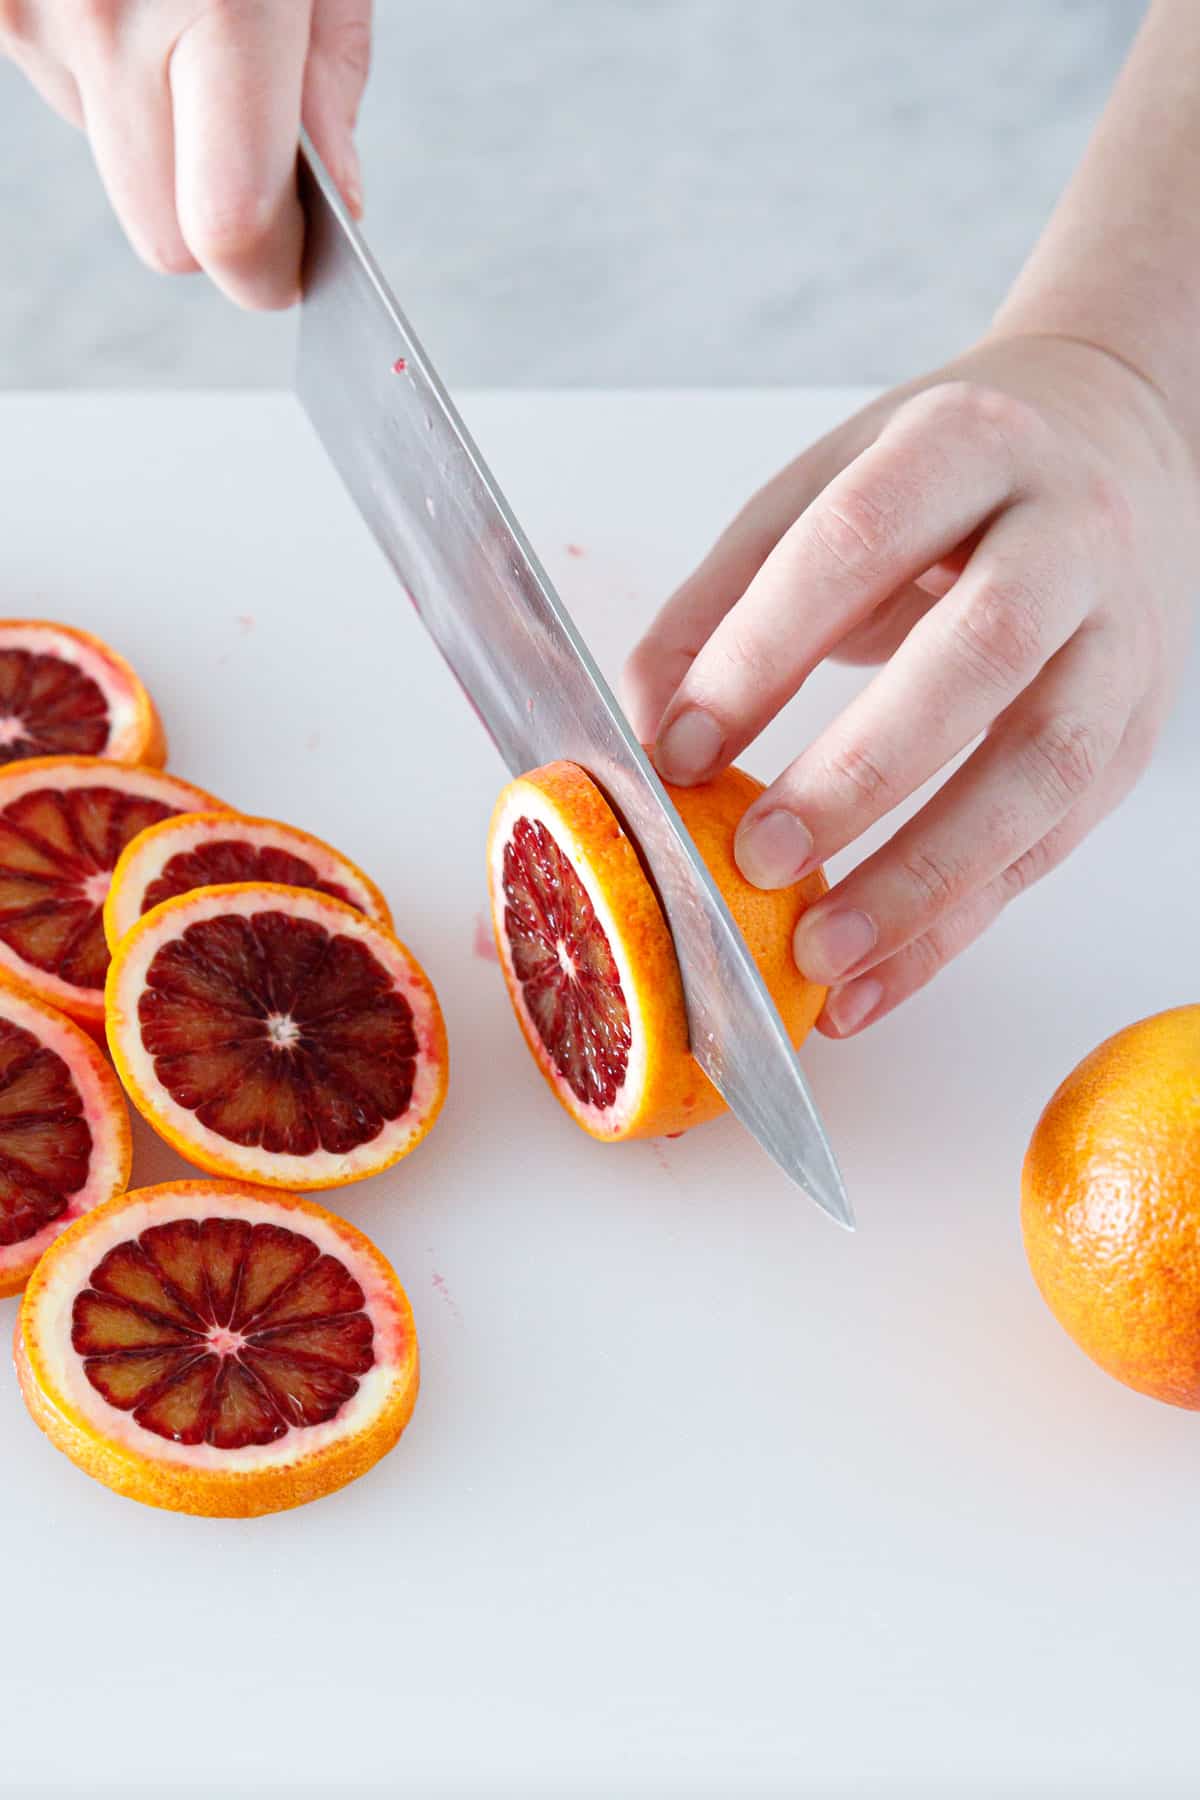 Slicing blood oranges into thin slices for candying.